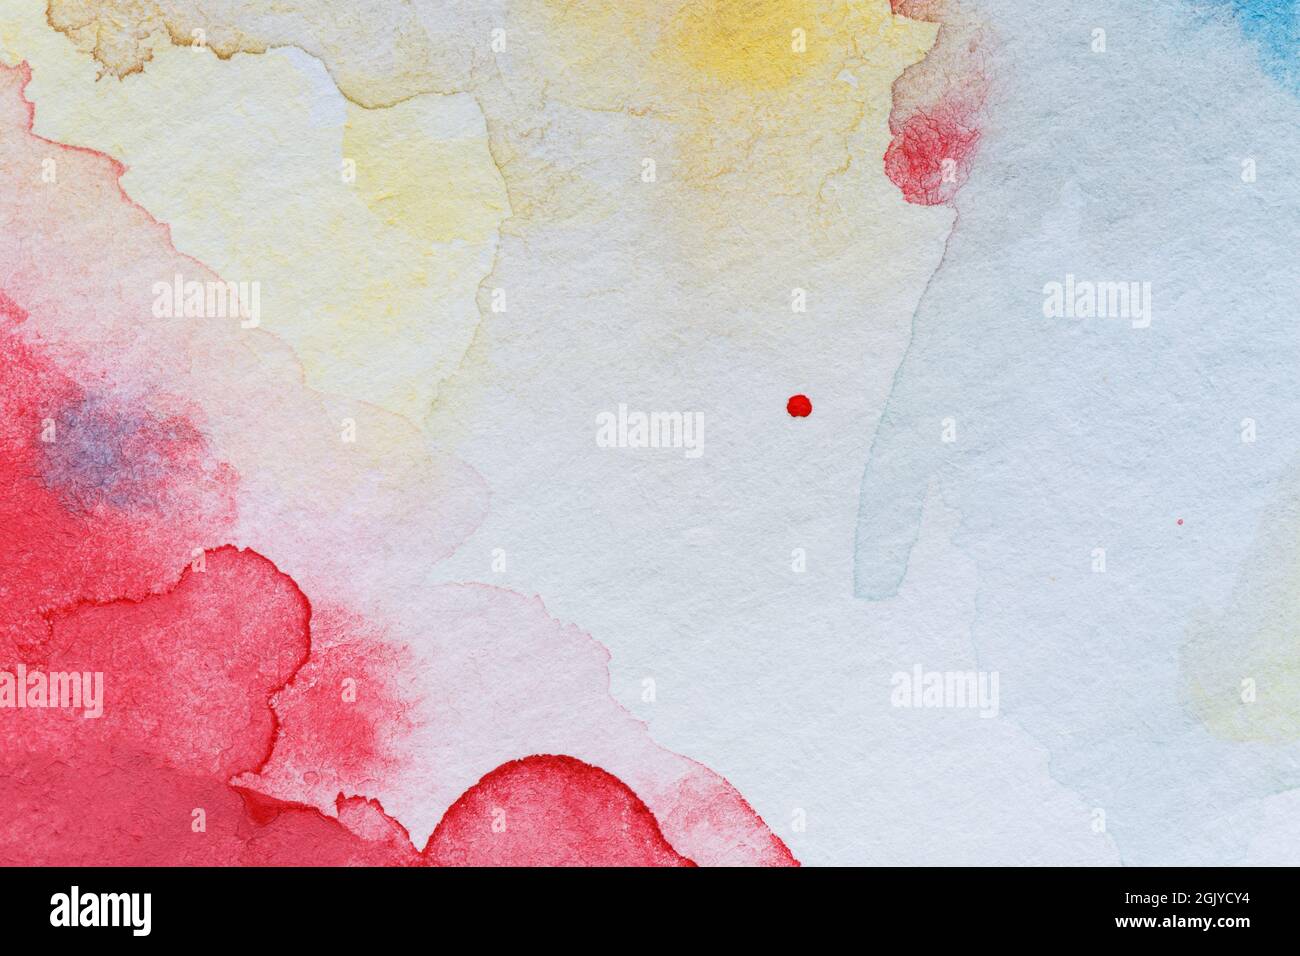 Macro close-up of an abstract red and yellow watercolor gradient fill background with watercolour stains. Full frame textured white paper background. Stock Photo